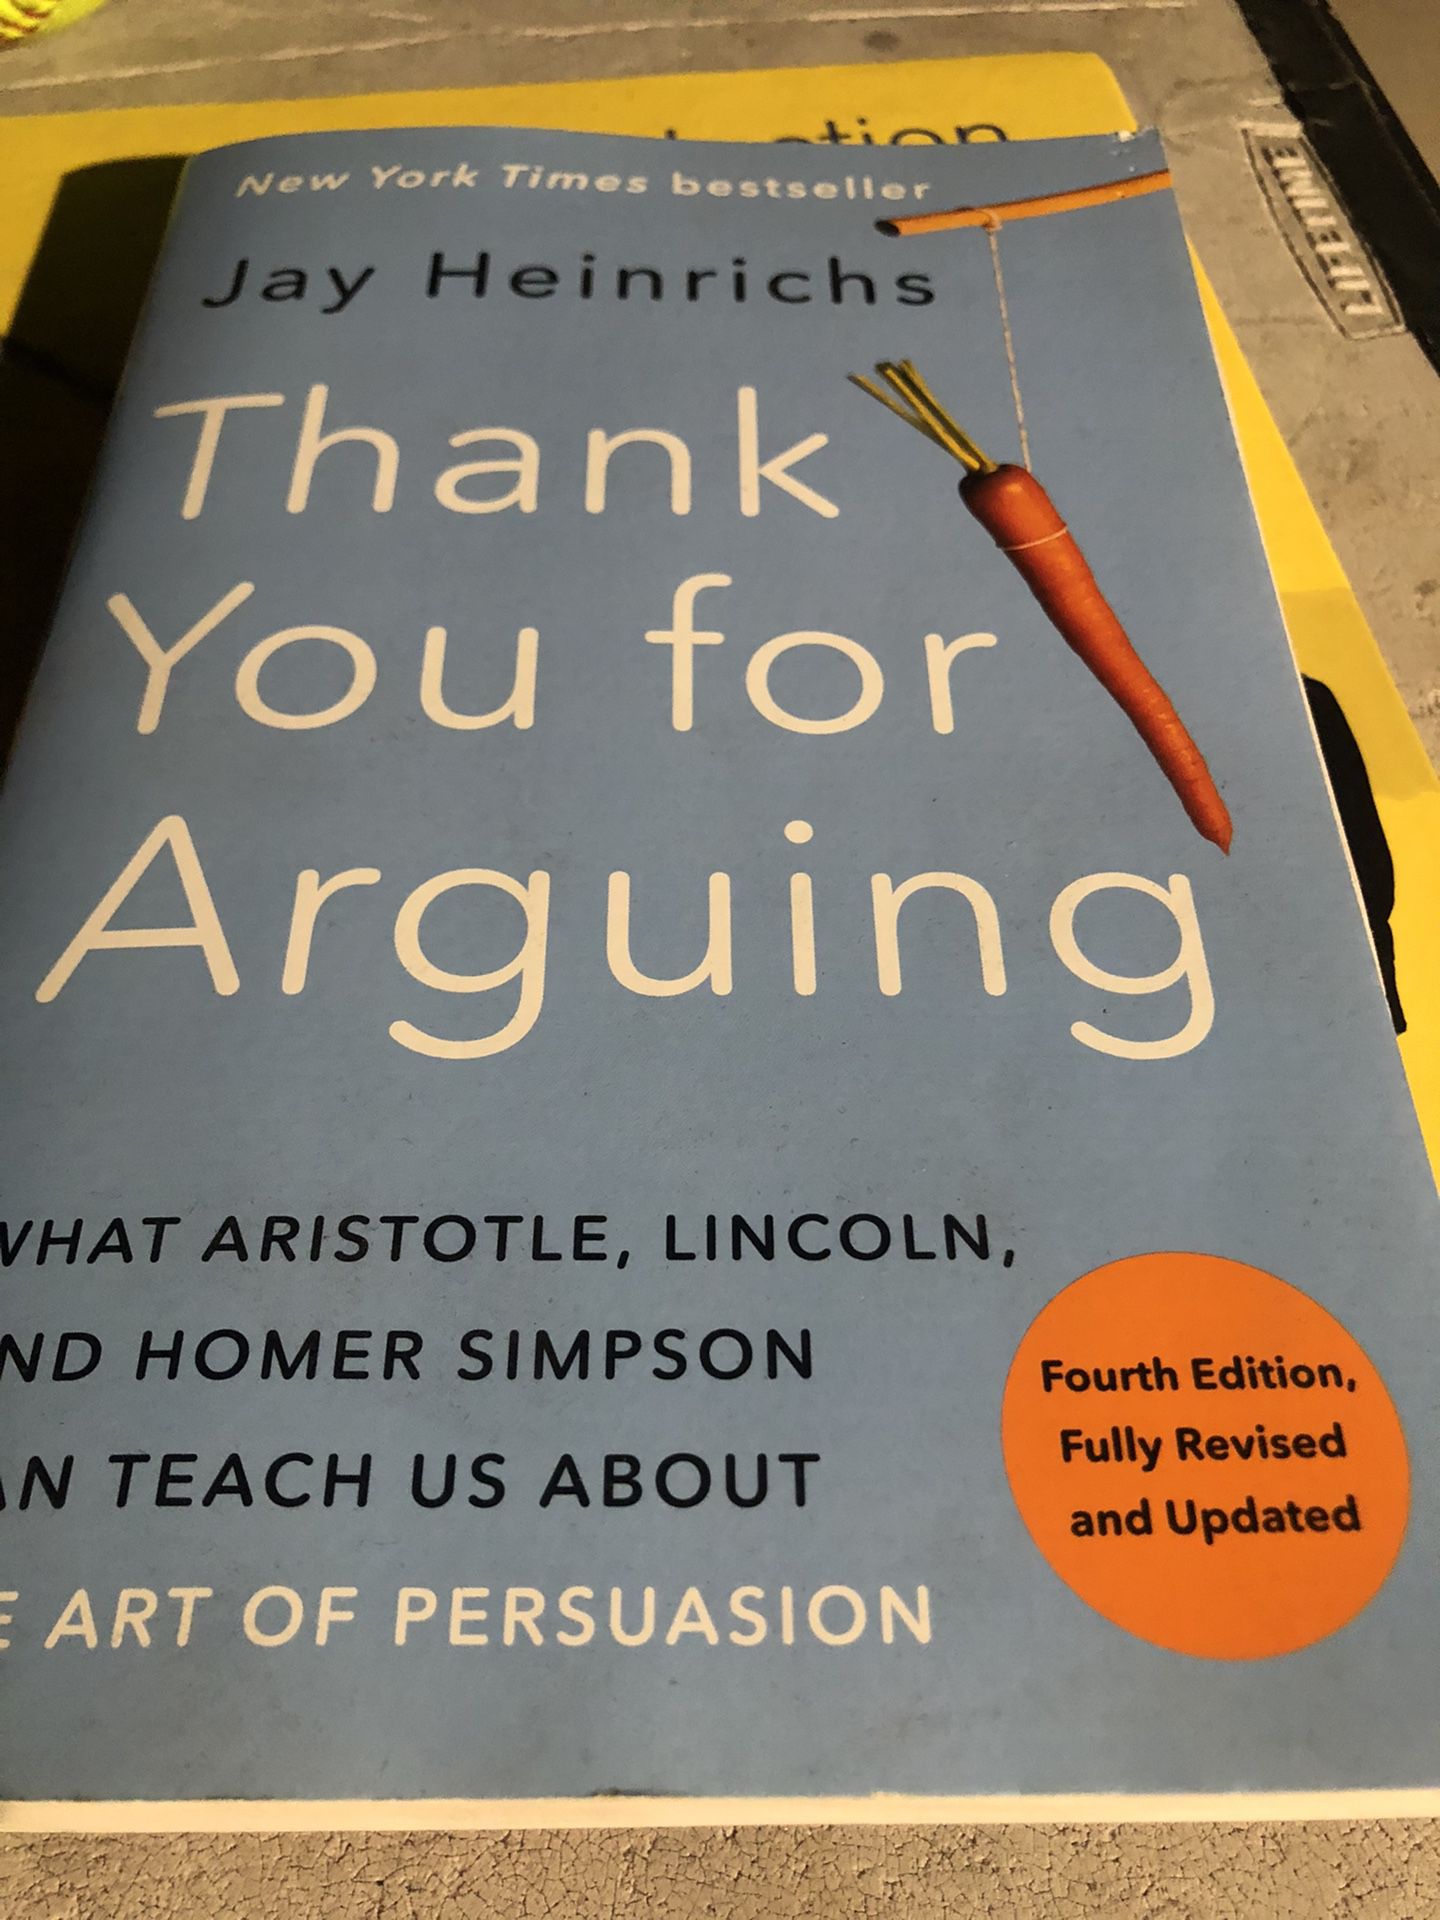 Jay Heinrichs “thank You For Arguing”